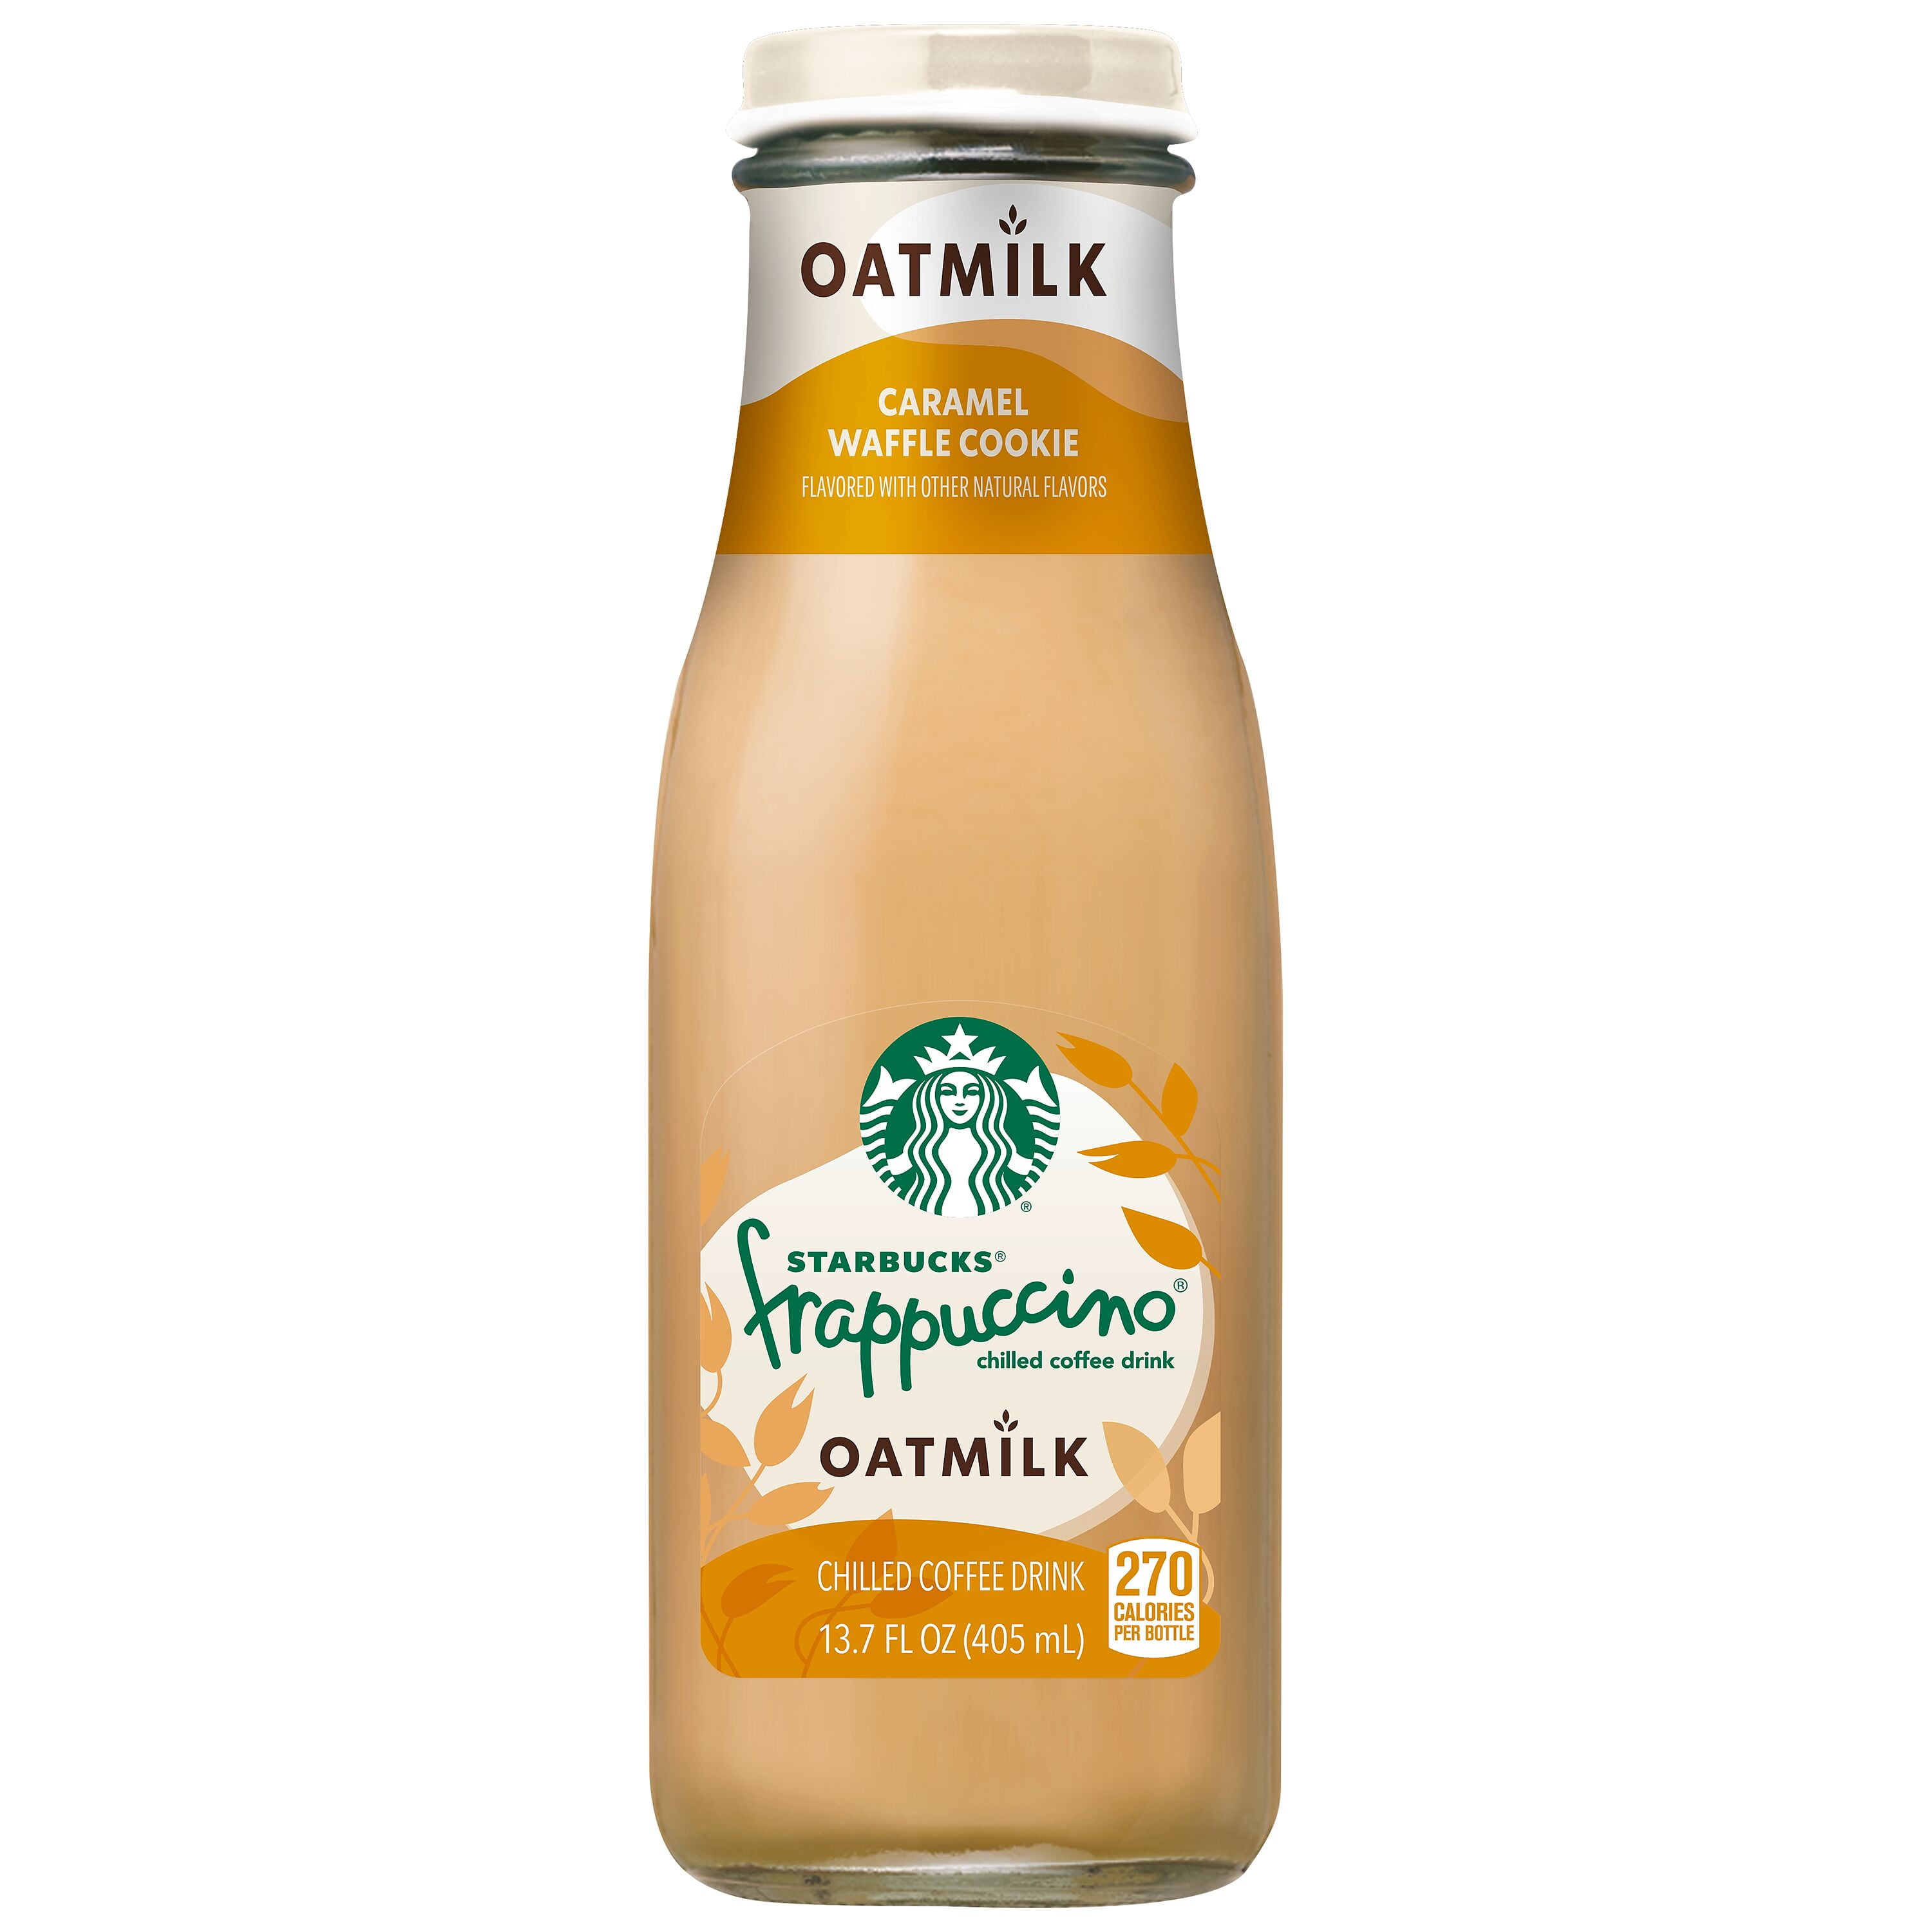 Starbucks Frappuccino with Oat Milk Caramel Waffle Cookie Iced Coffee Drink  13.7 fl oz Bottle